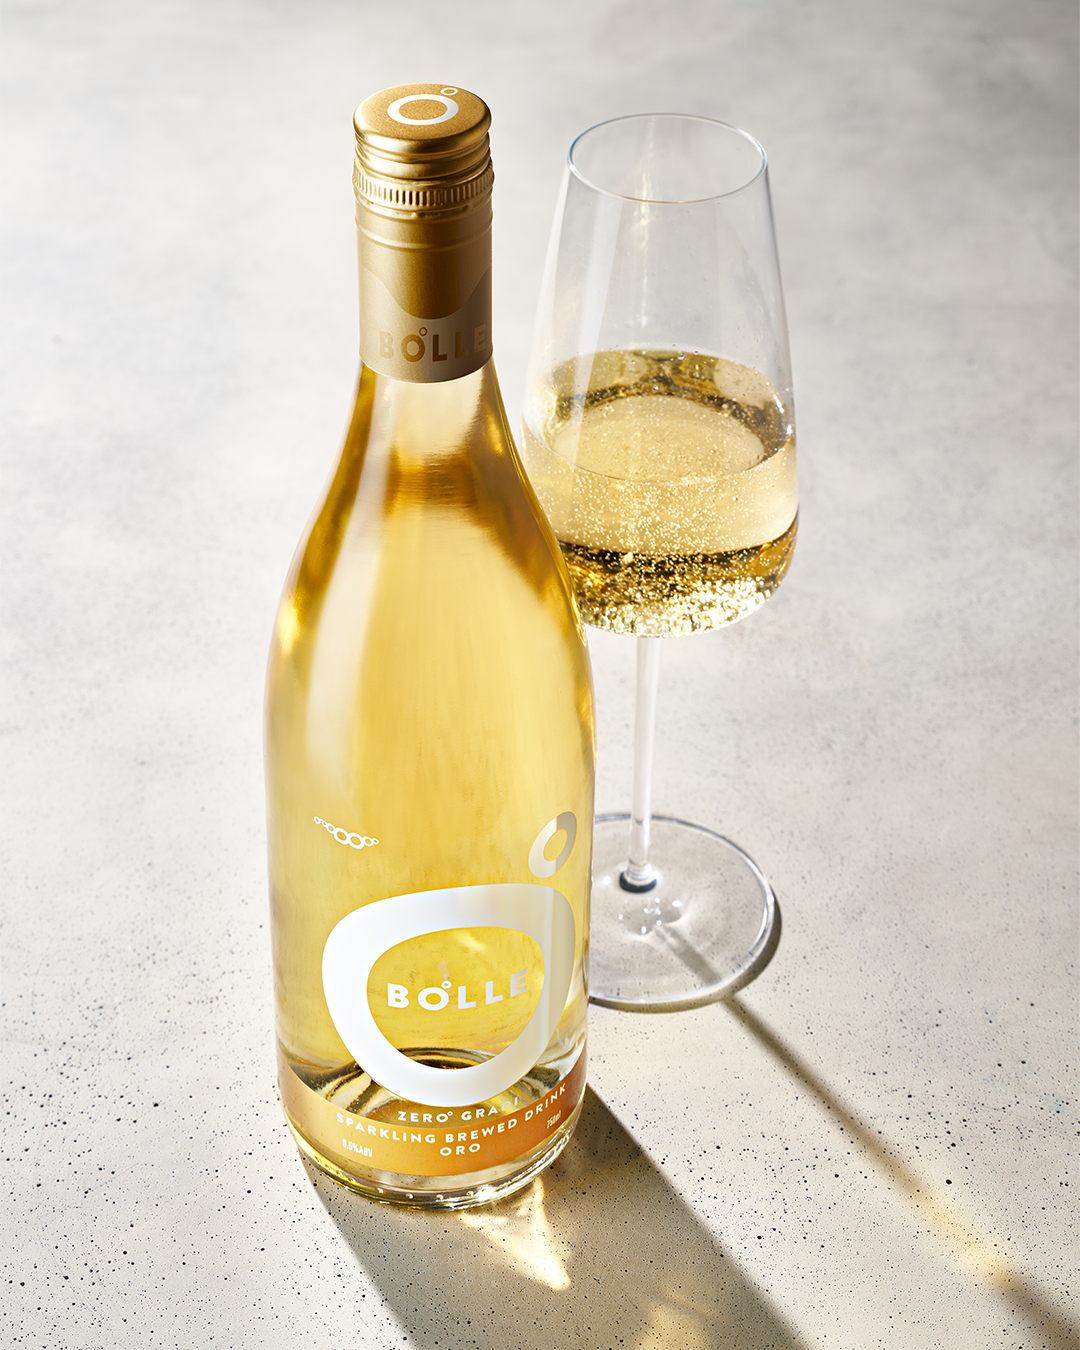 Bolle+Oro+bottle+and+glass__1080x1350.png